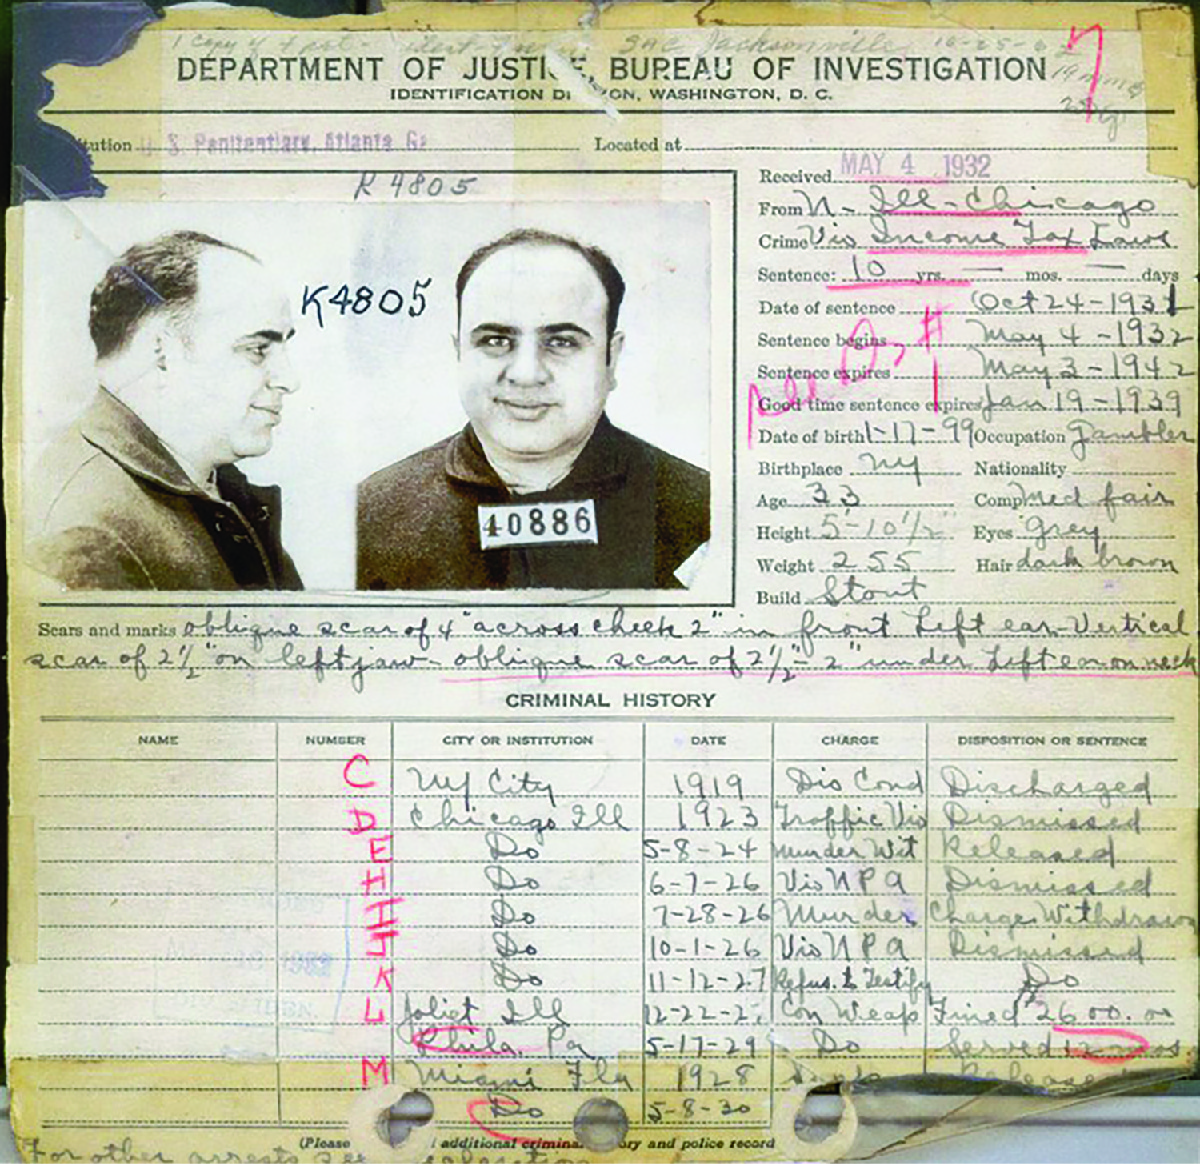 The FBI’s 1932 criminal record on Al Capone shows the many charges against him, most of which were dismissed.